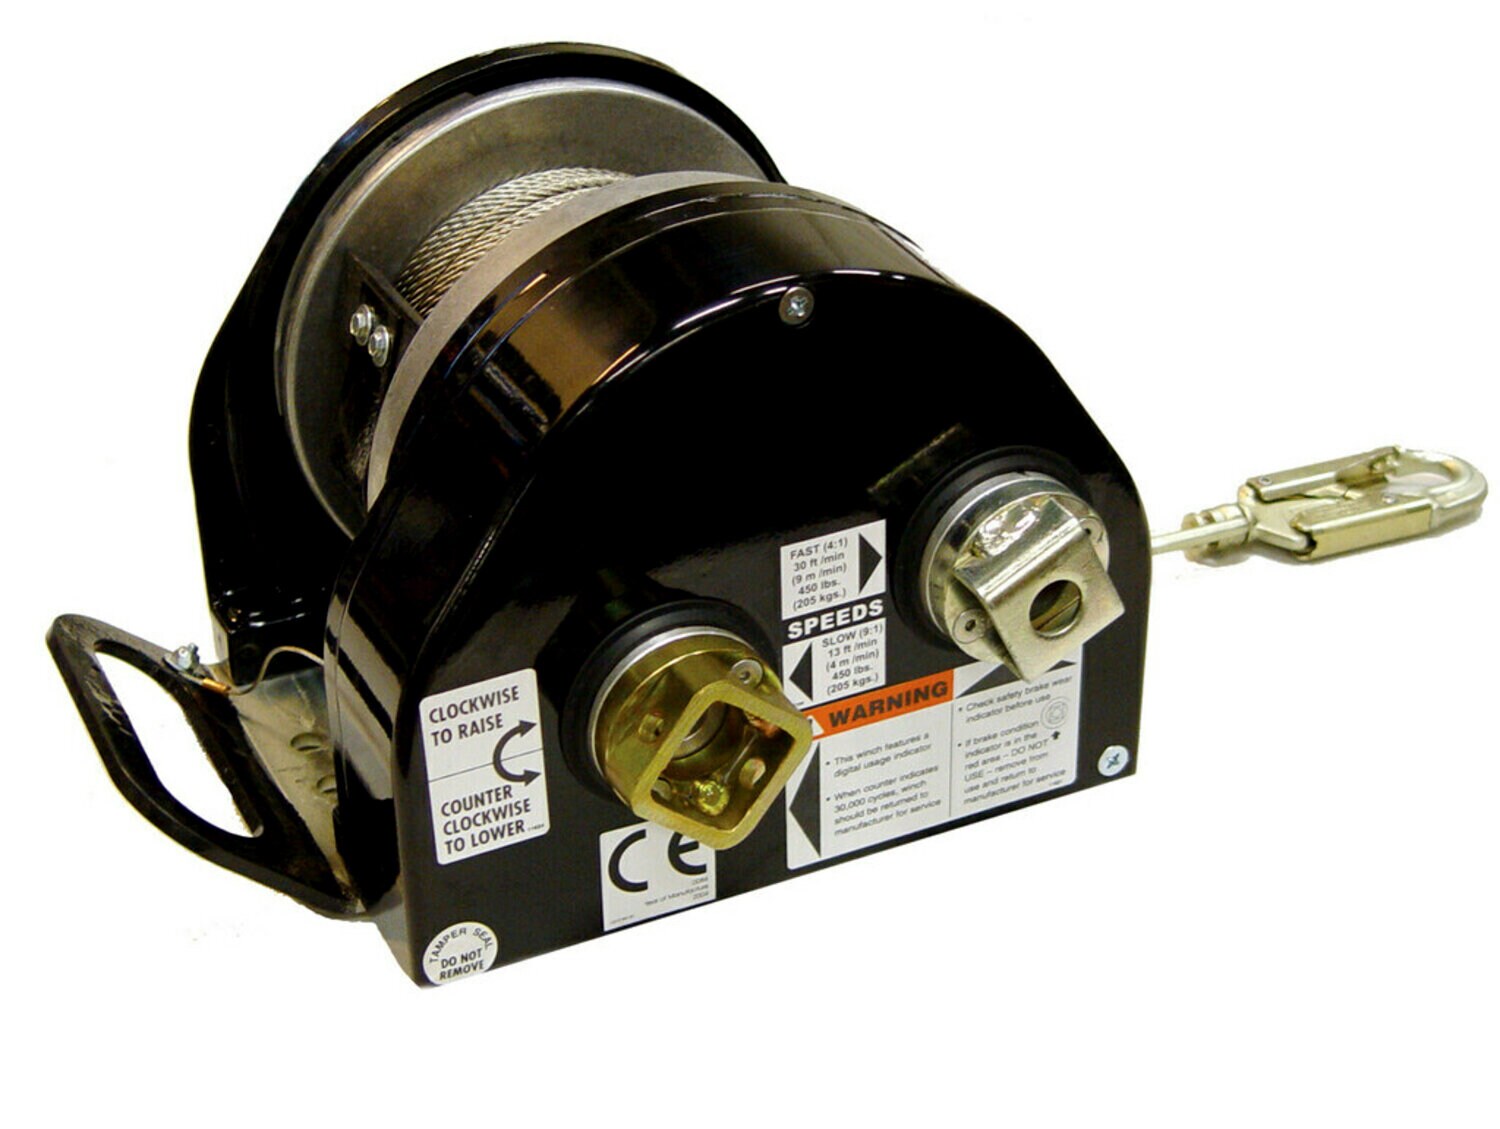 7100221794 - 3M DBI-SALA Confined Space Winch, Power Drive 8518571